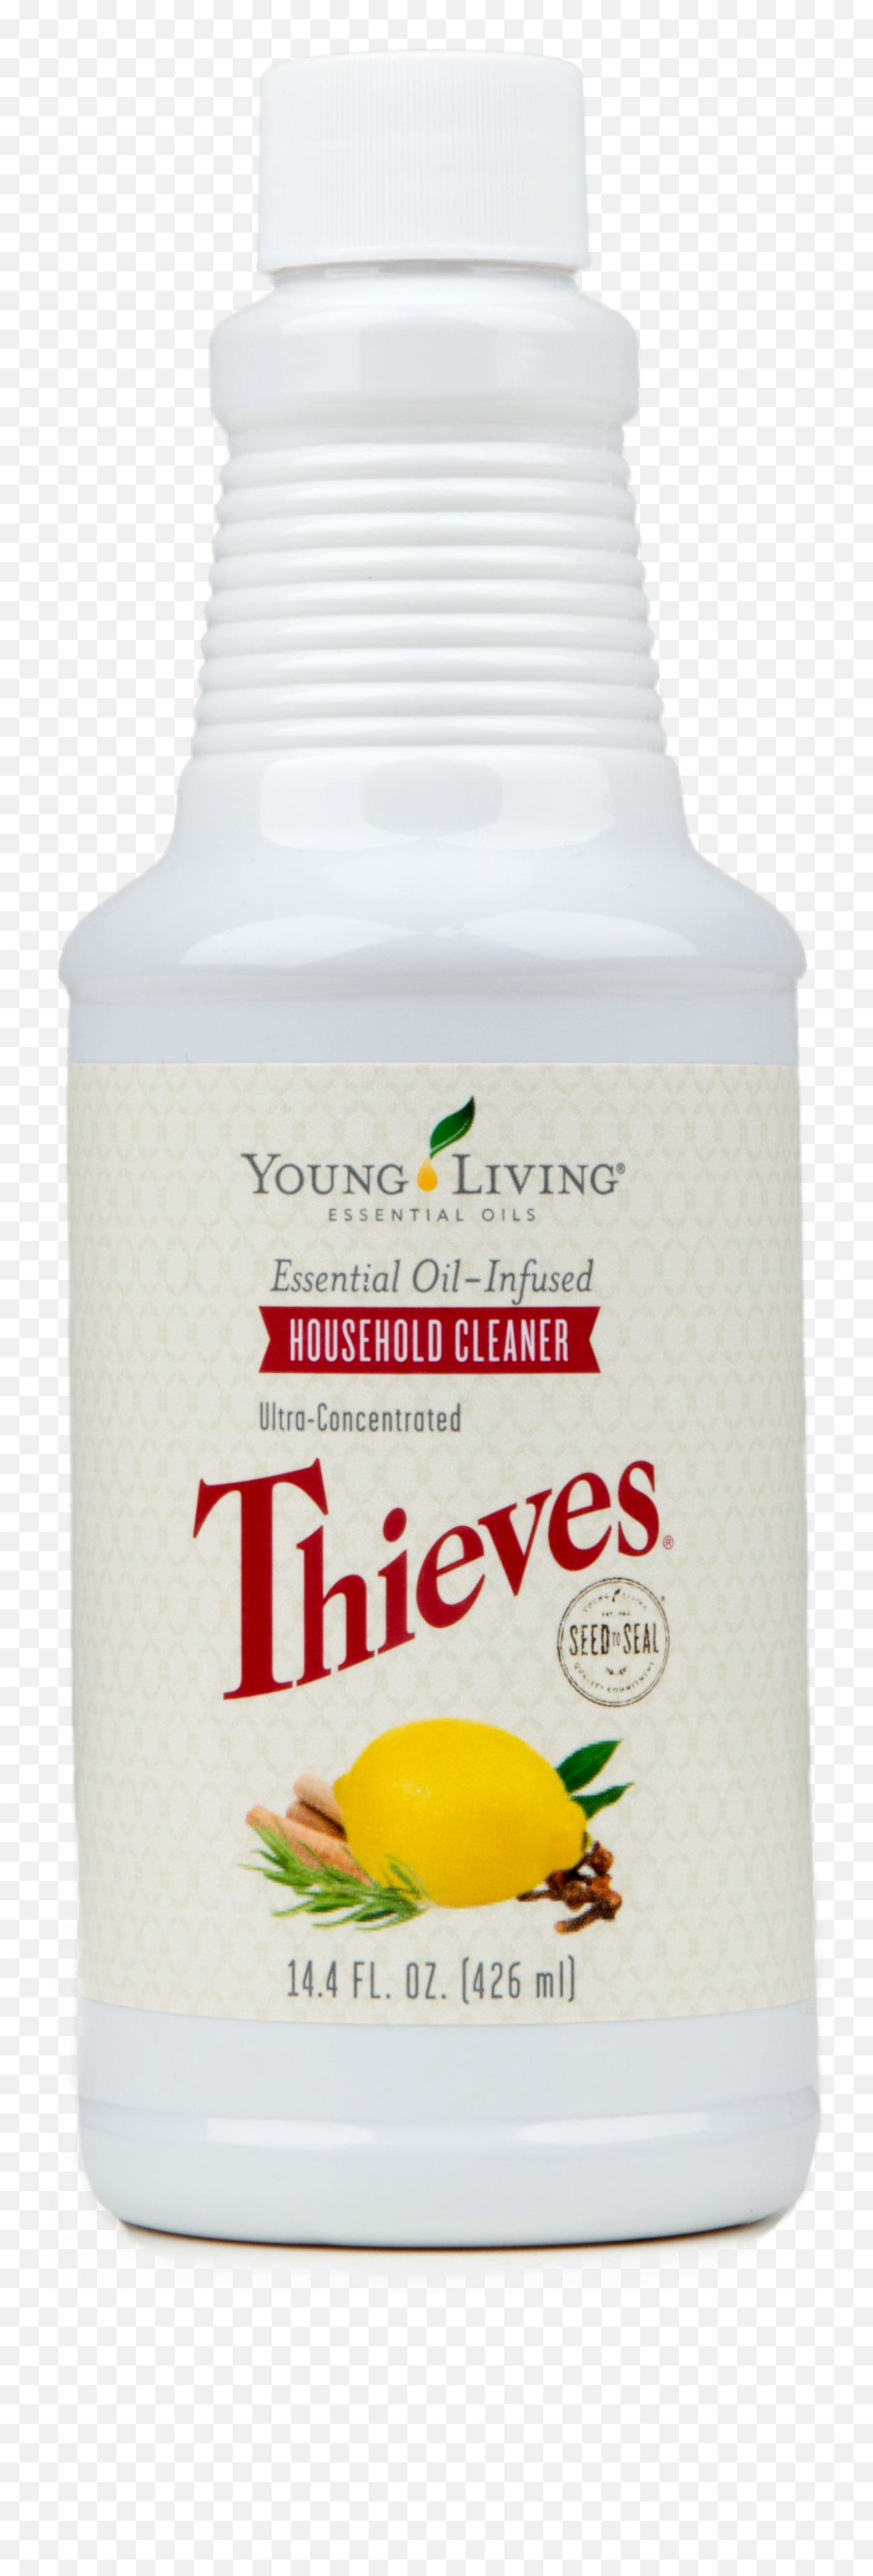 Ingredients You Can Trust With Young - Thieves Household Cleaner Young Living Png,Young Living Logo Png